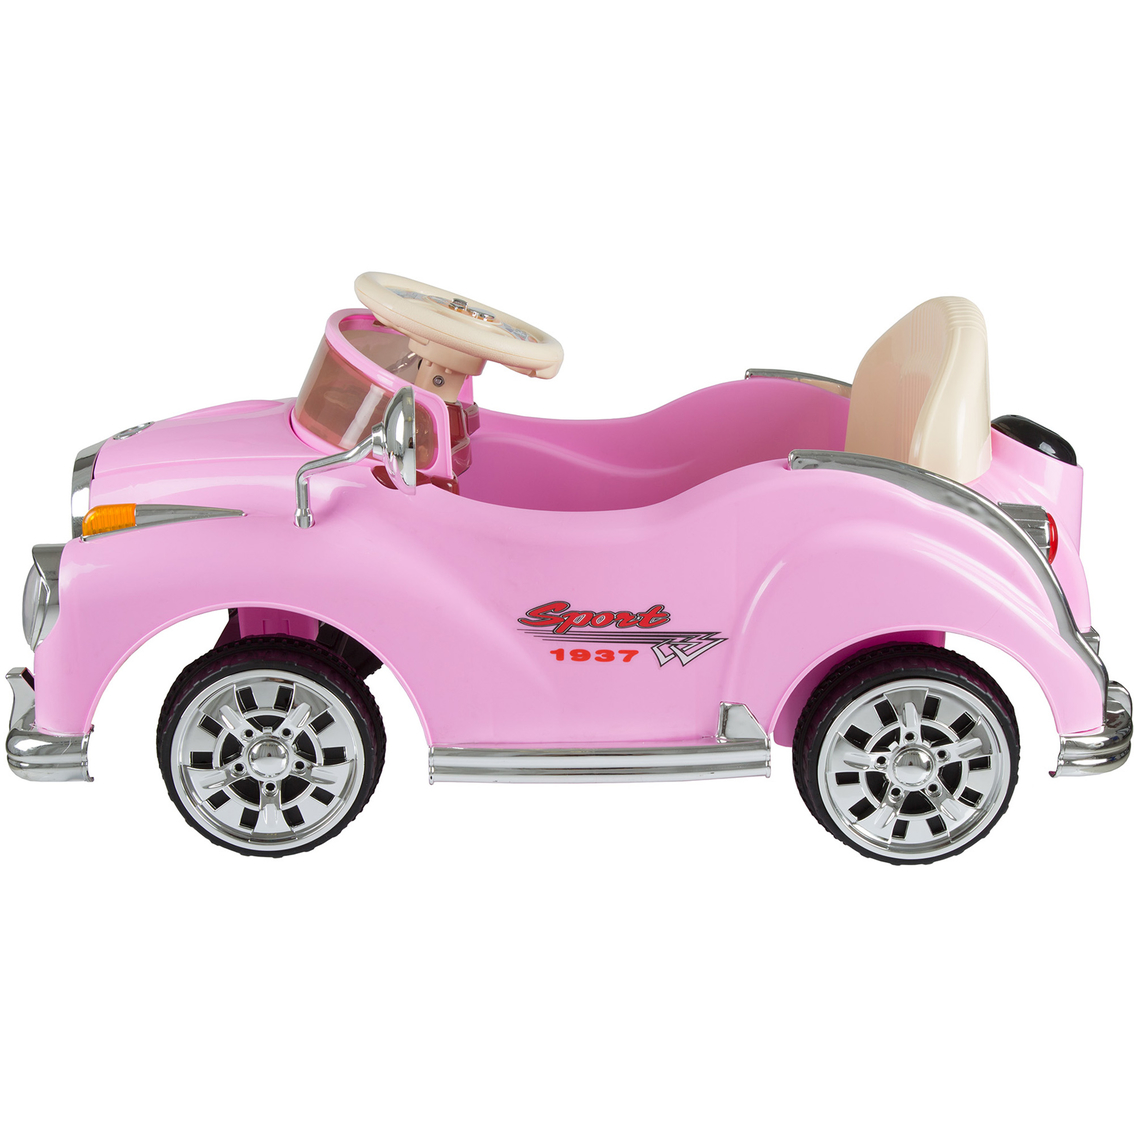 Lil' Rider Ride On Toy Car Coupe - Image 5 of 7